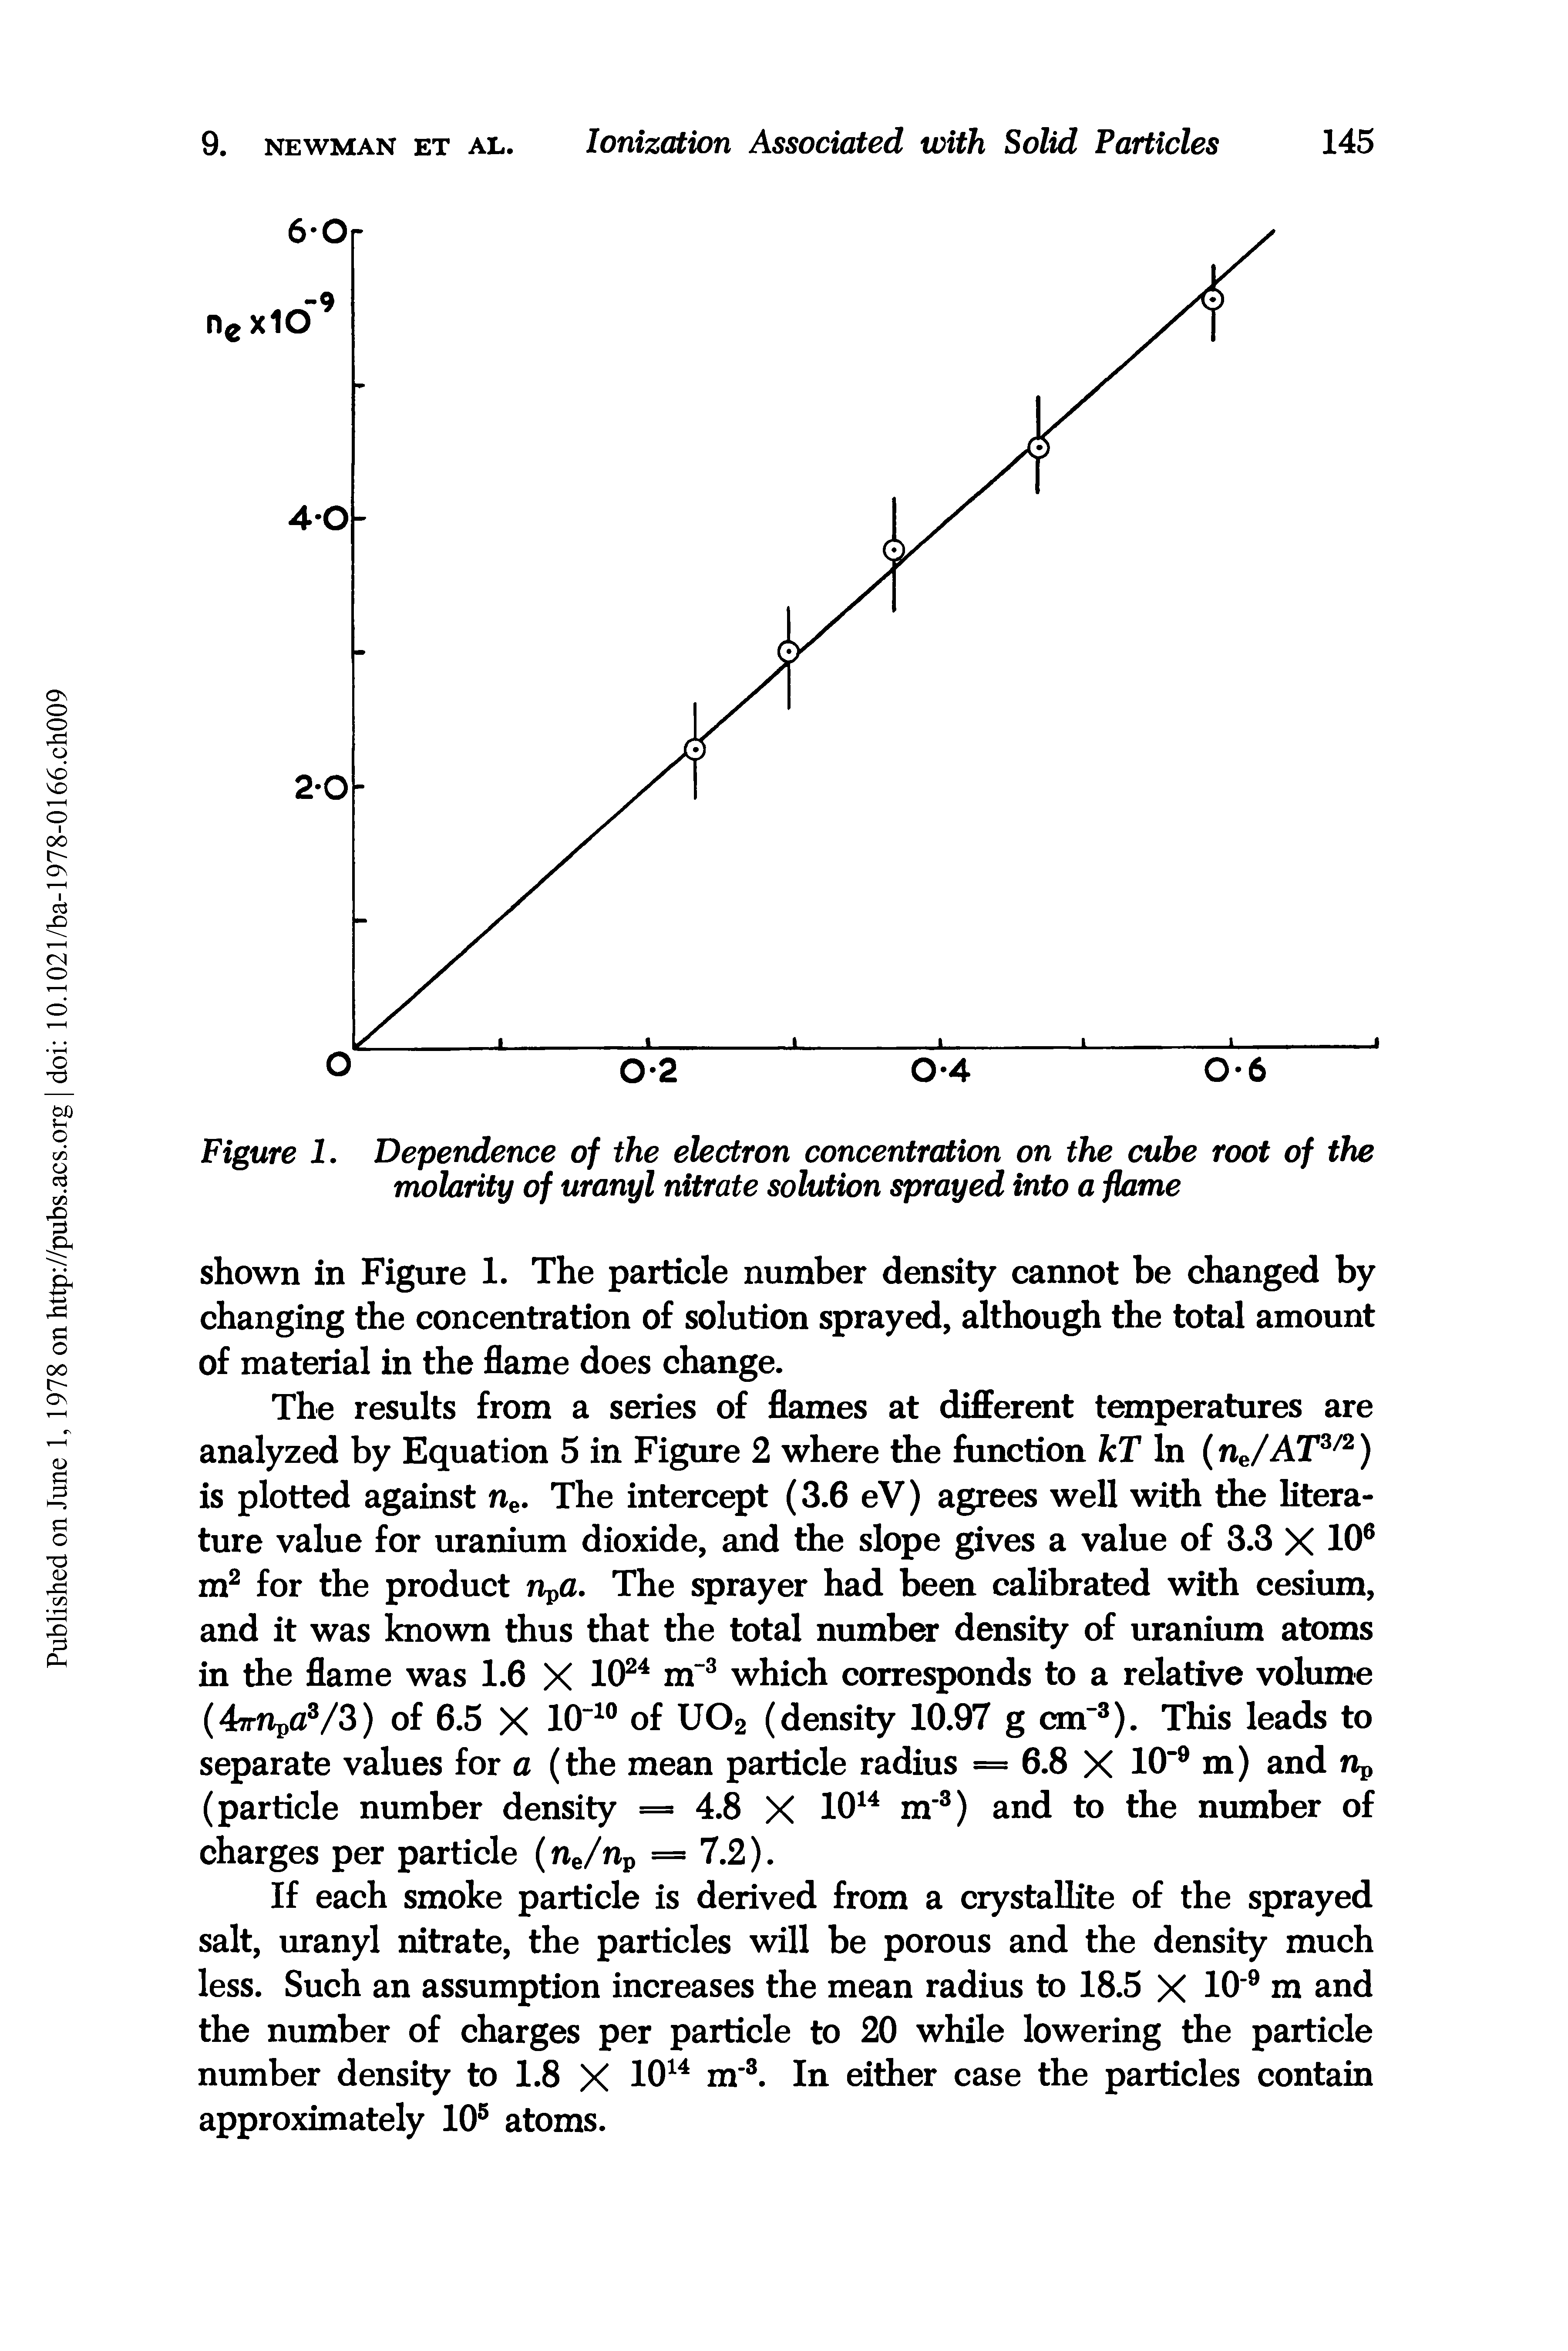 Figure 1, Dependence of the electron concentration on the cube root of the molarity of uranyl nitrate solution sprayed into a flame...